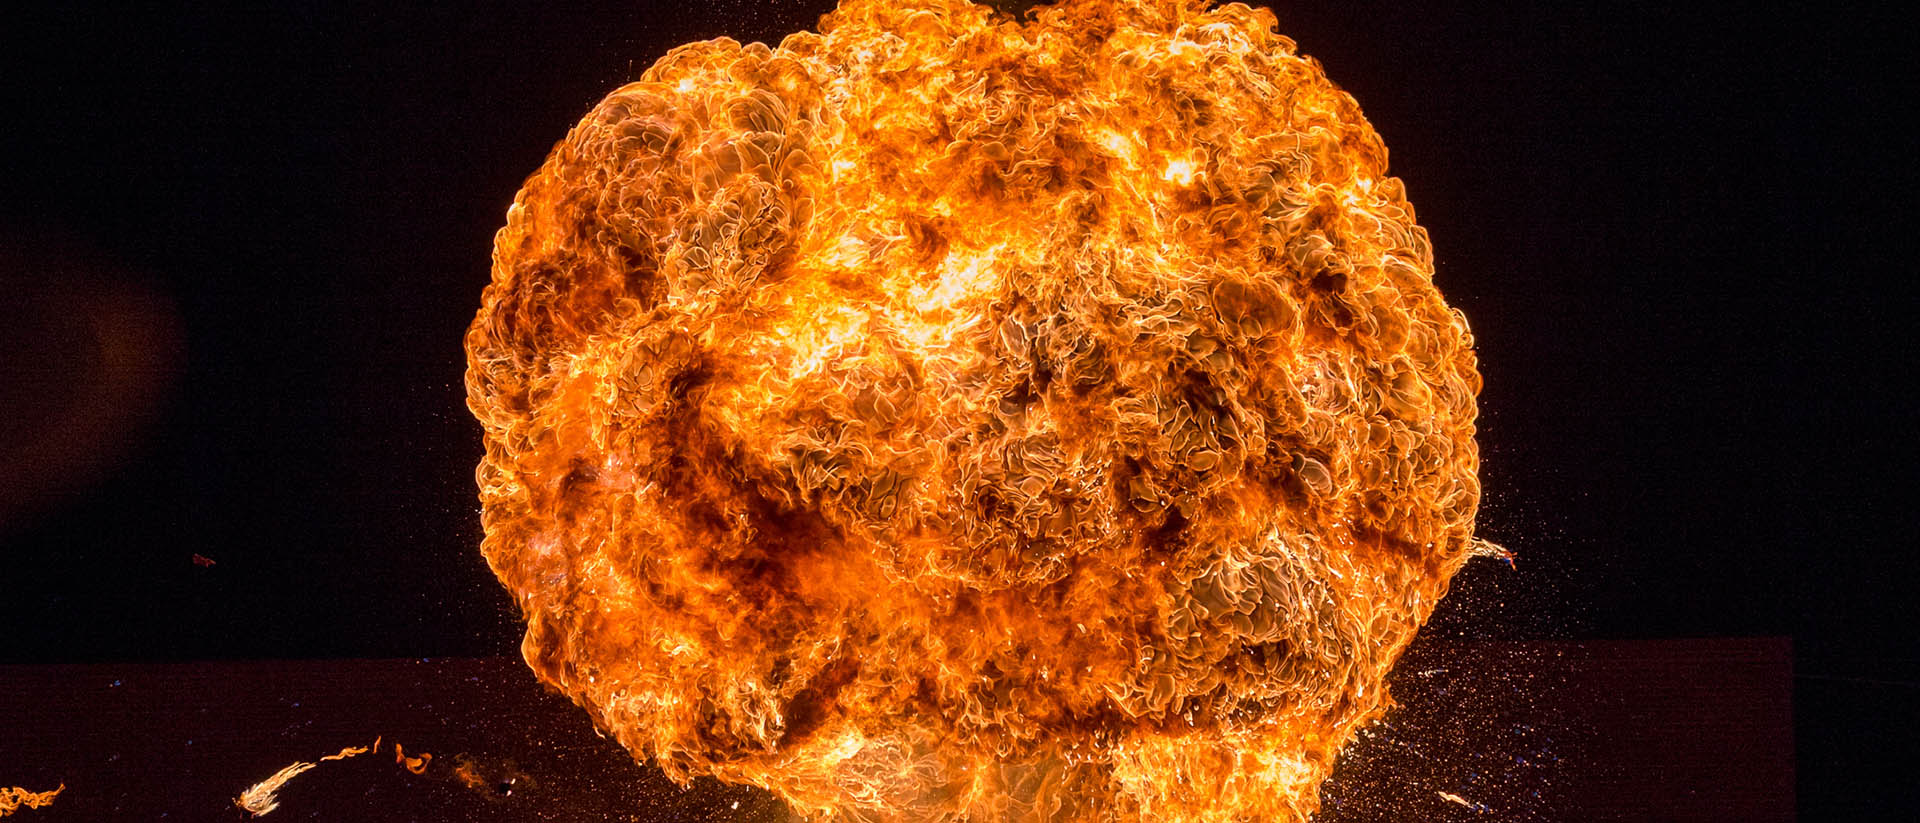 5 Explosive Fire Tutorials for After Effects